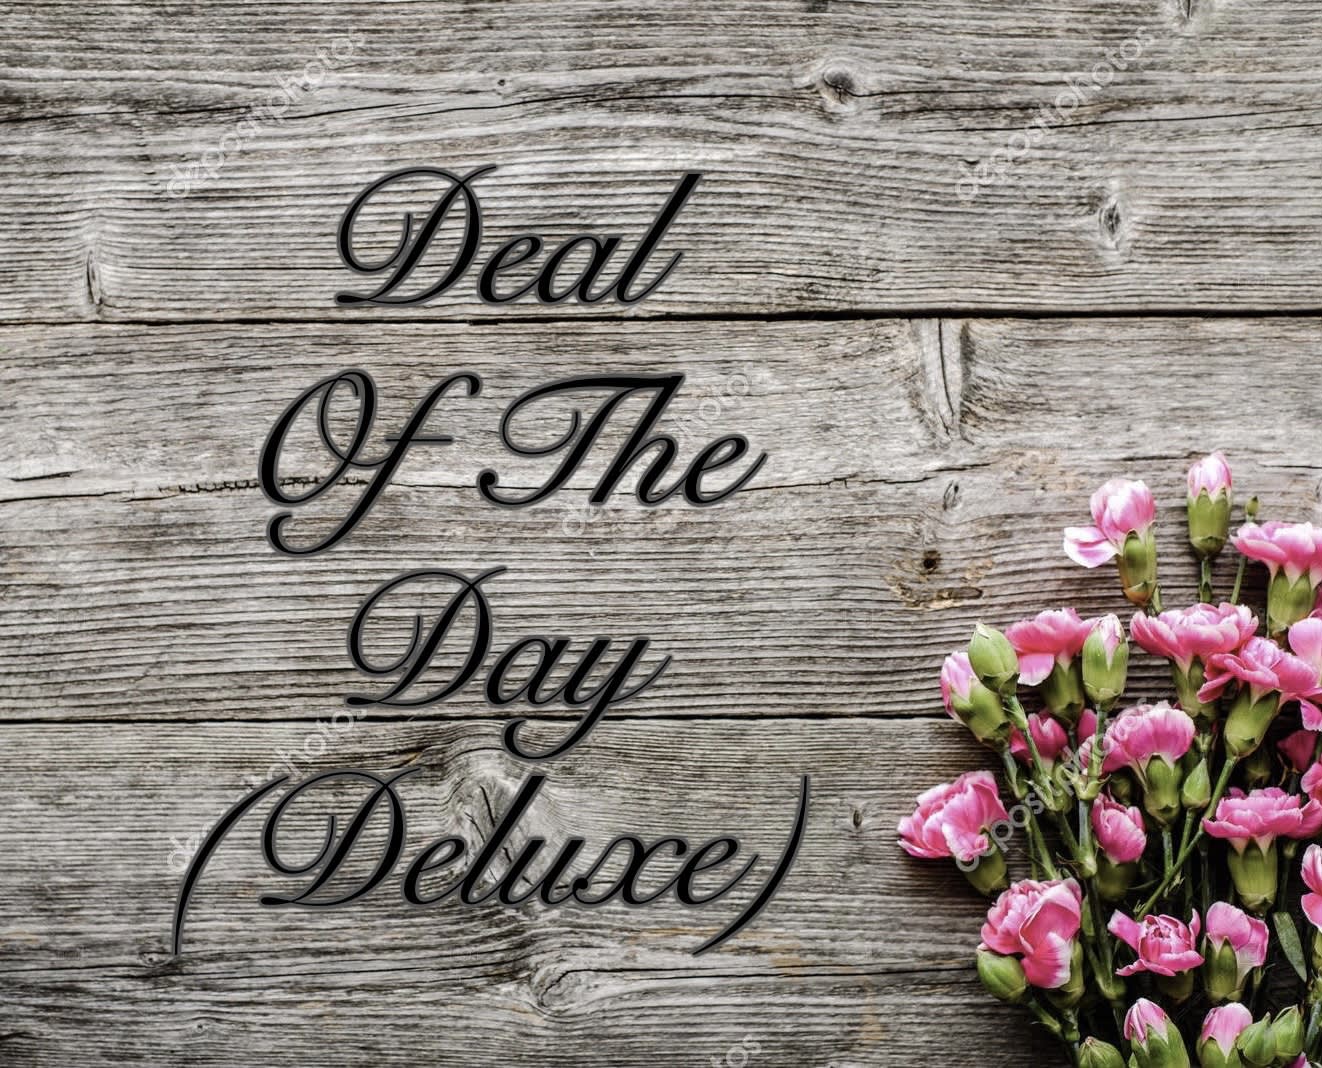 Deal of the Day (Deluxe)